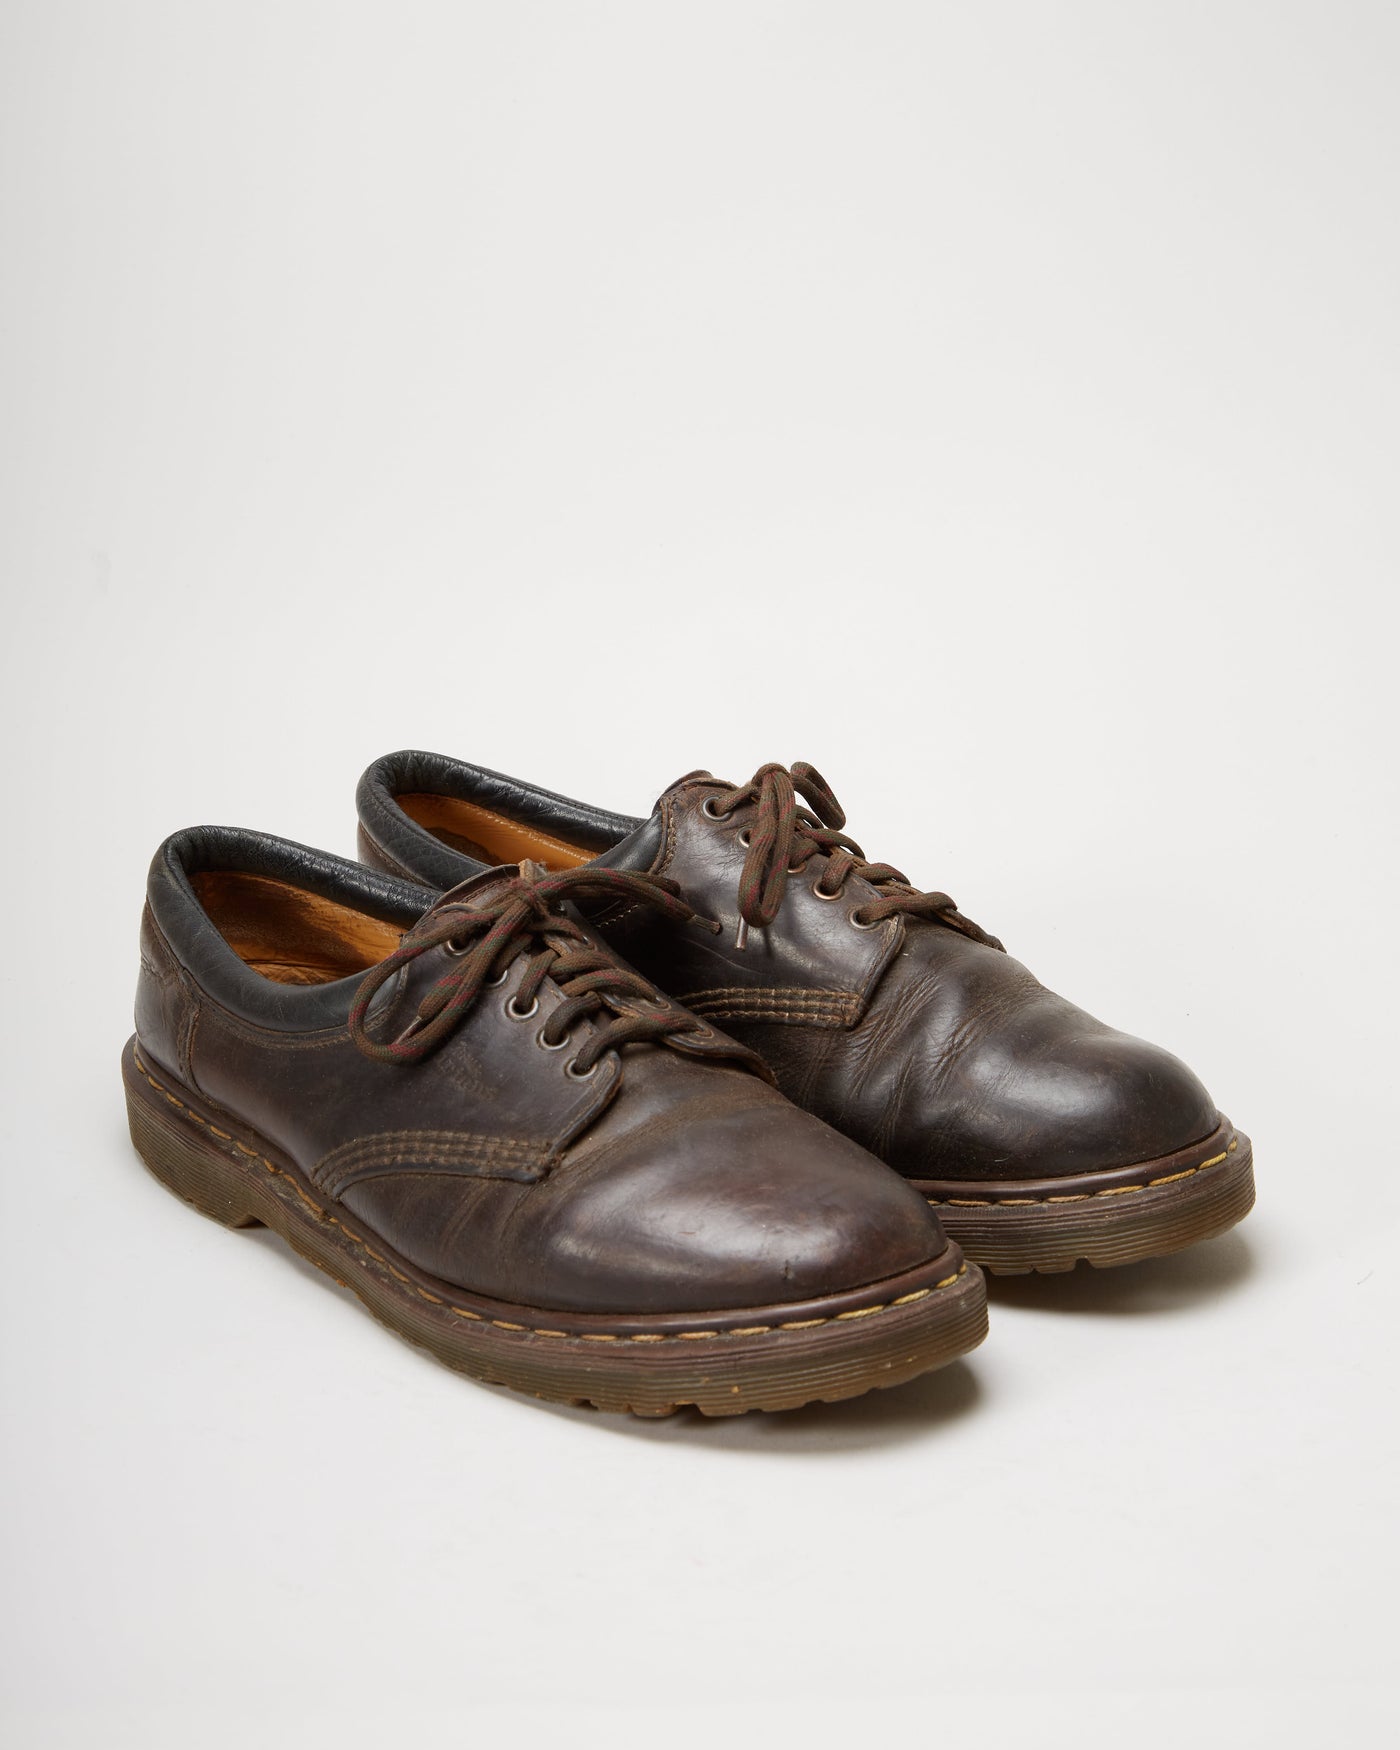 80s Made in England Dr Martens Shoes - UK 10